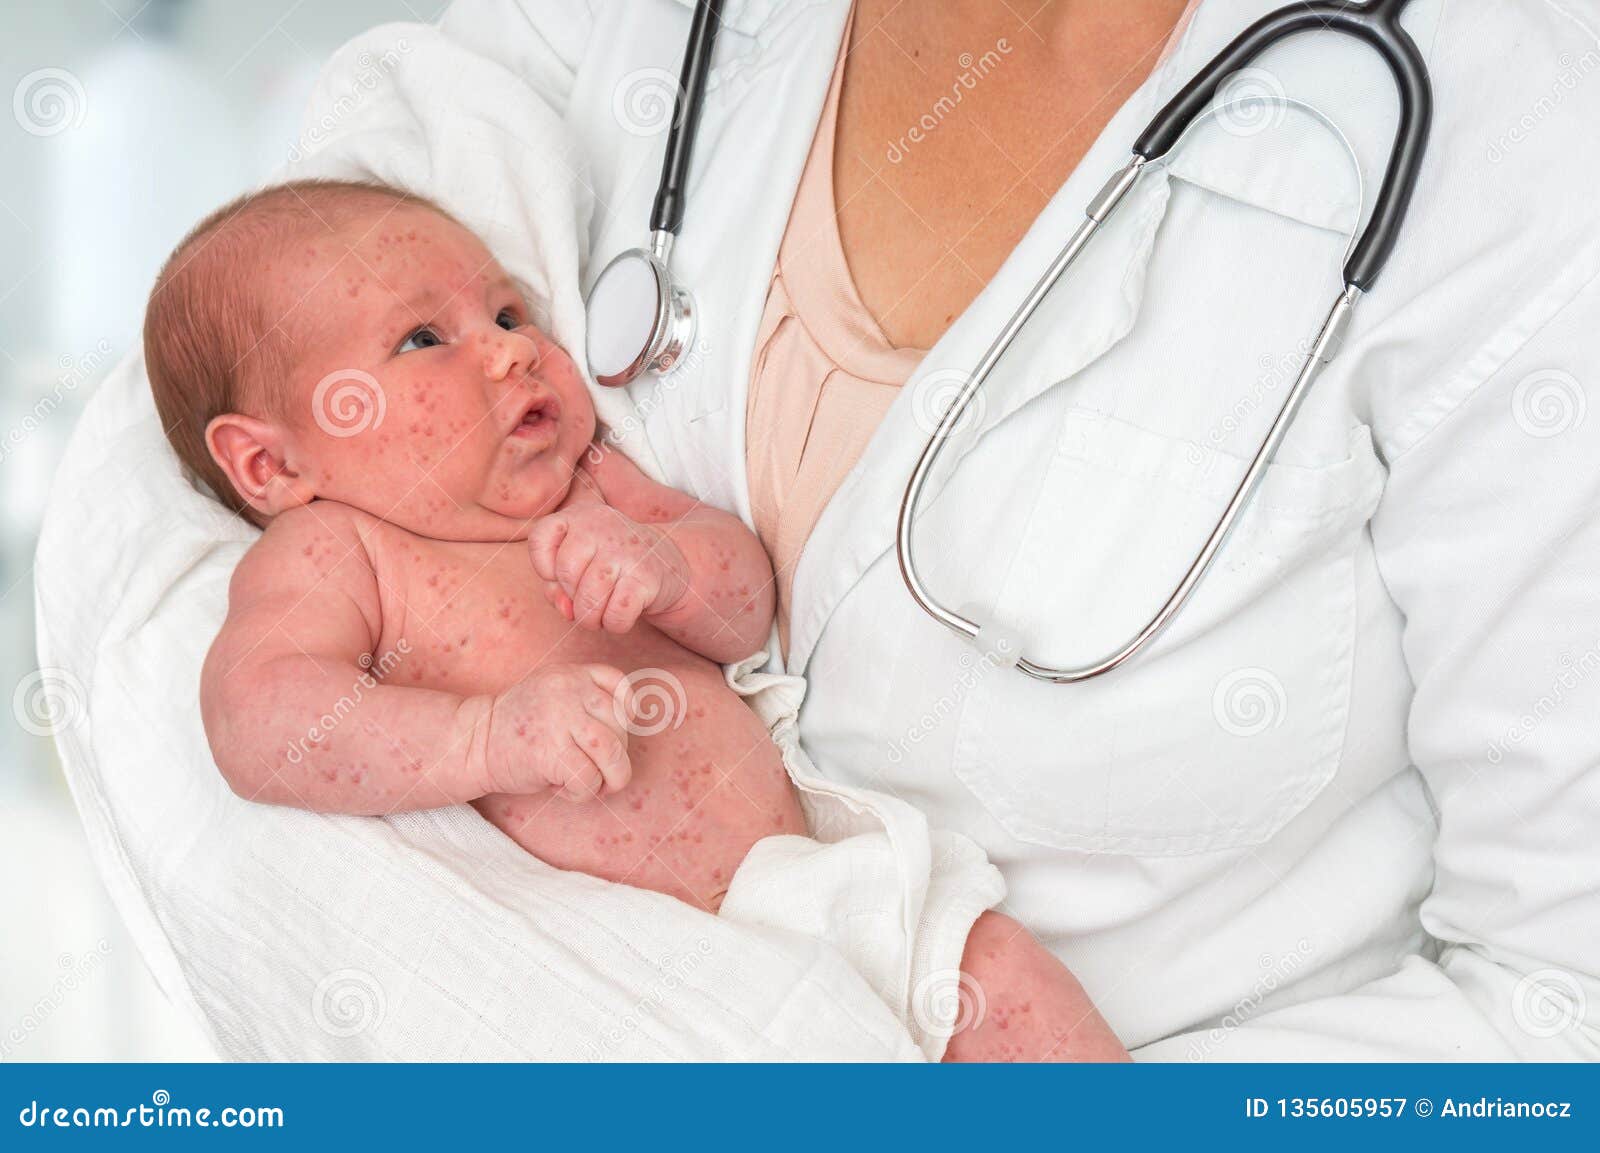 doctor holding a newborn baby which is sick rubella or measles